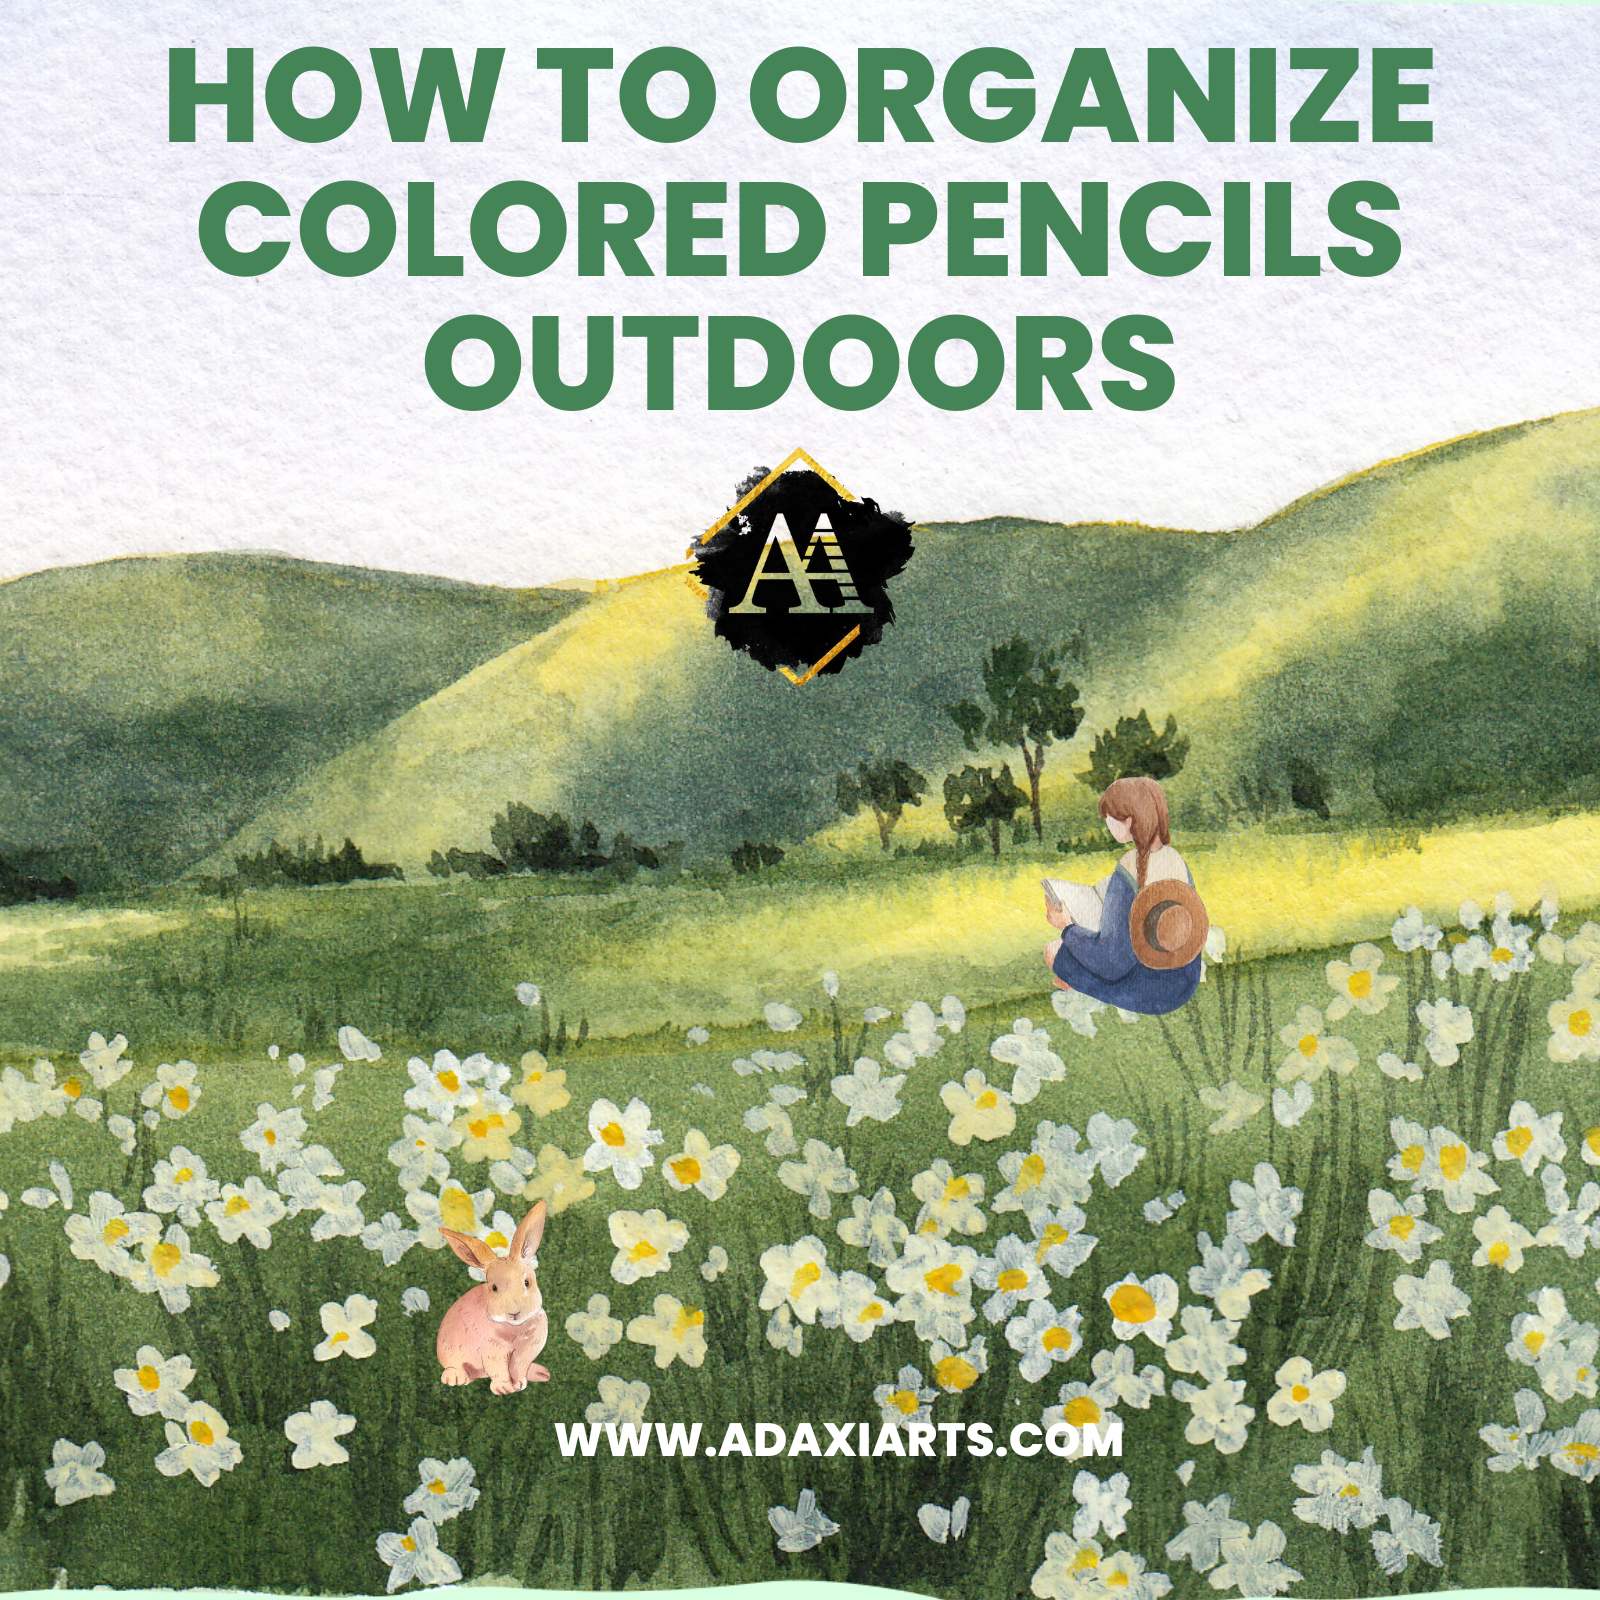 How to Organize Colored Pencils Outdoors